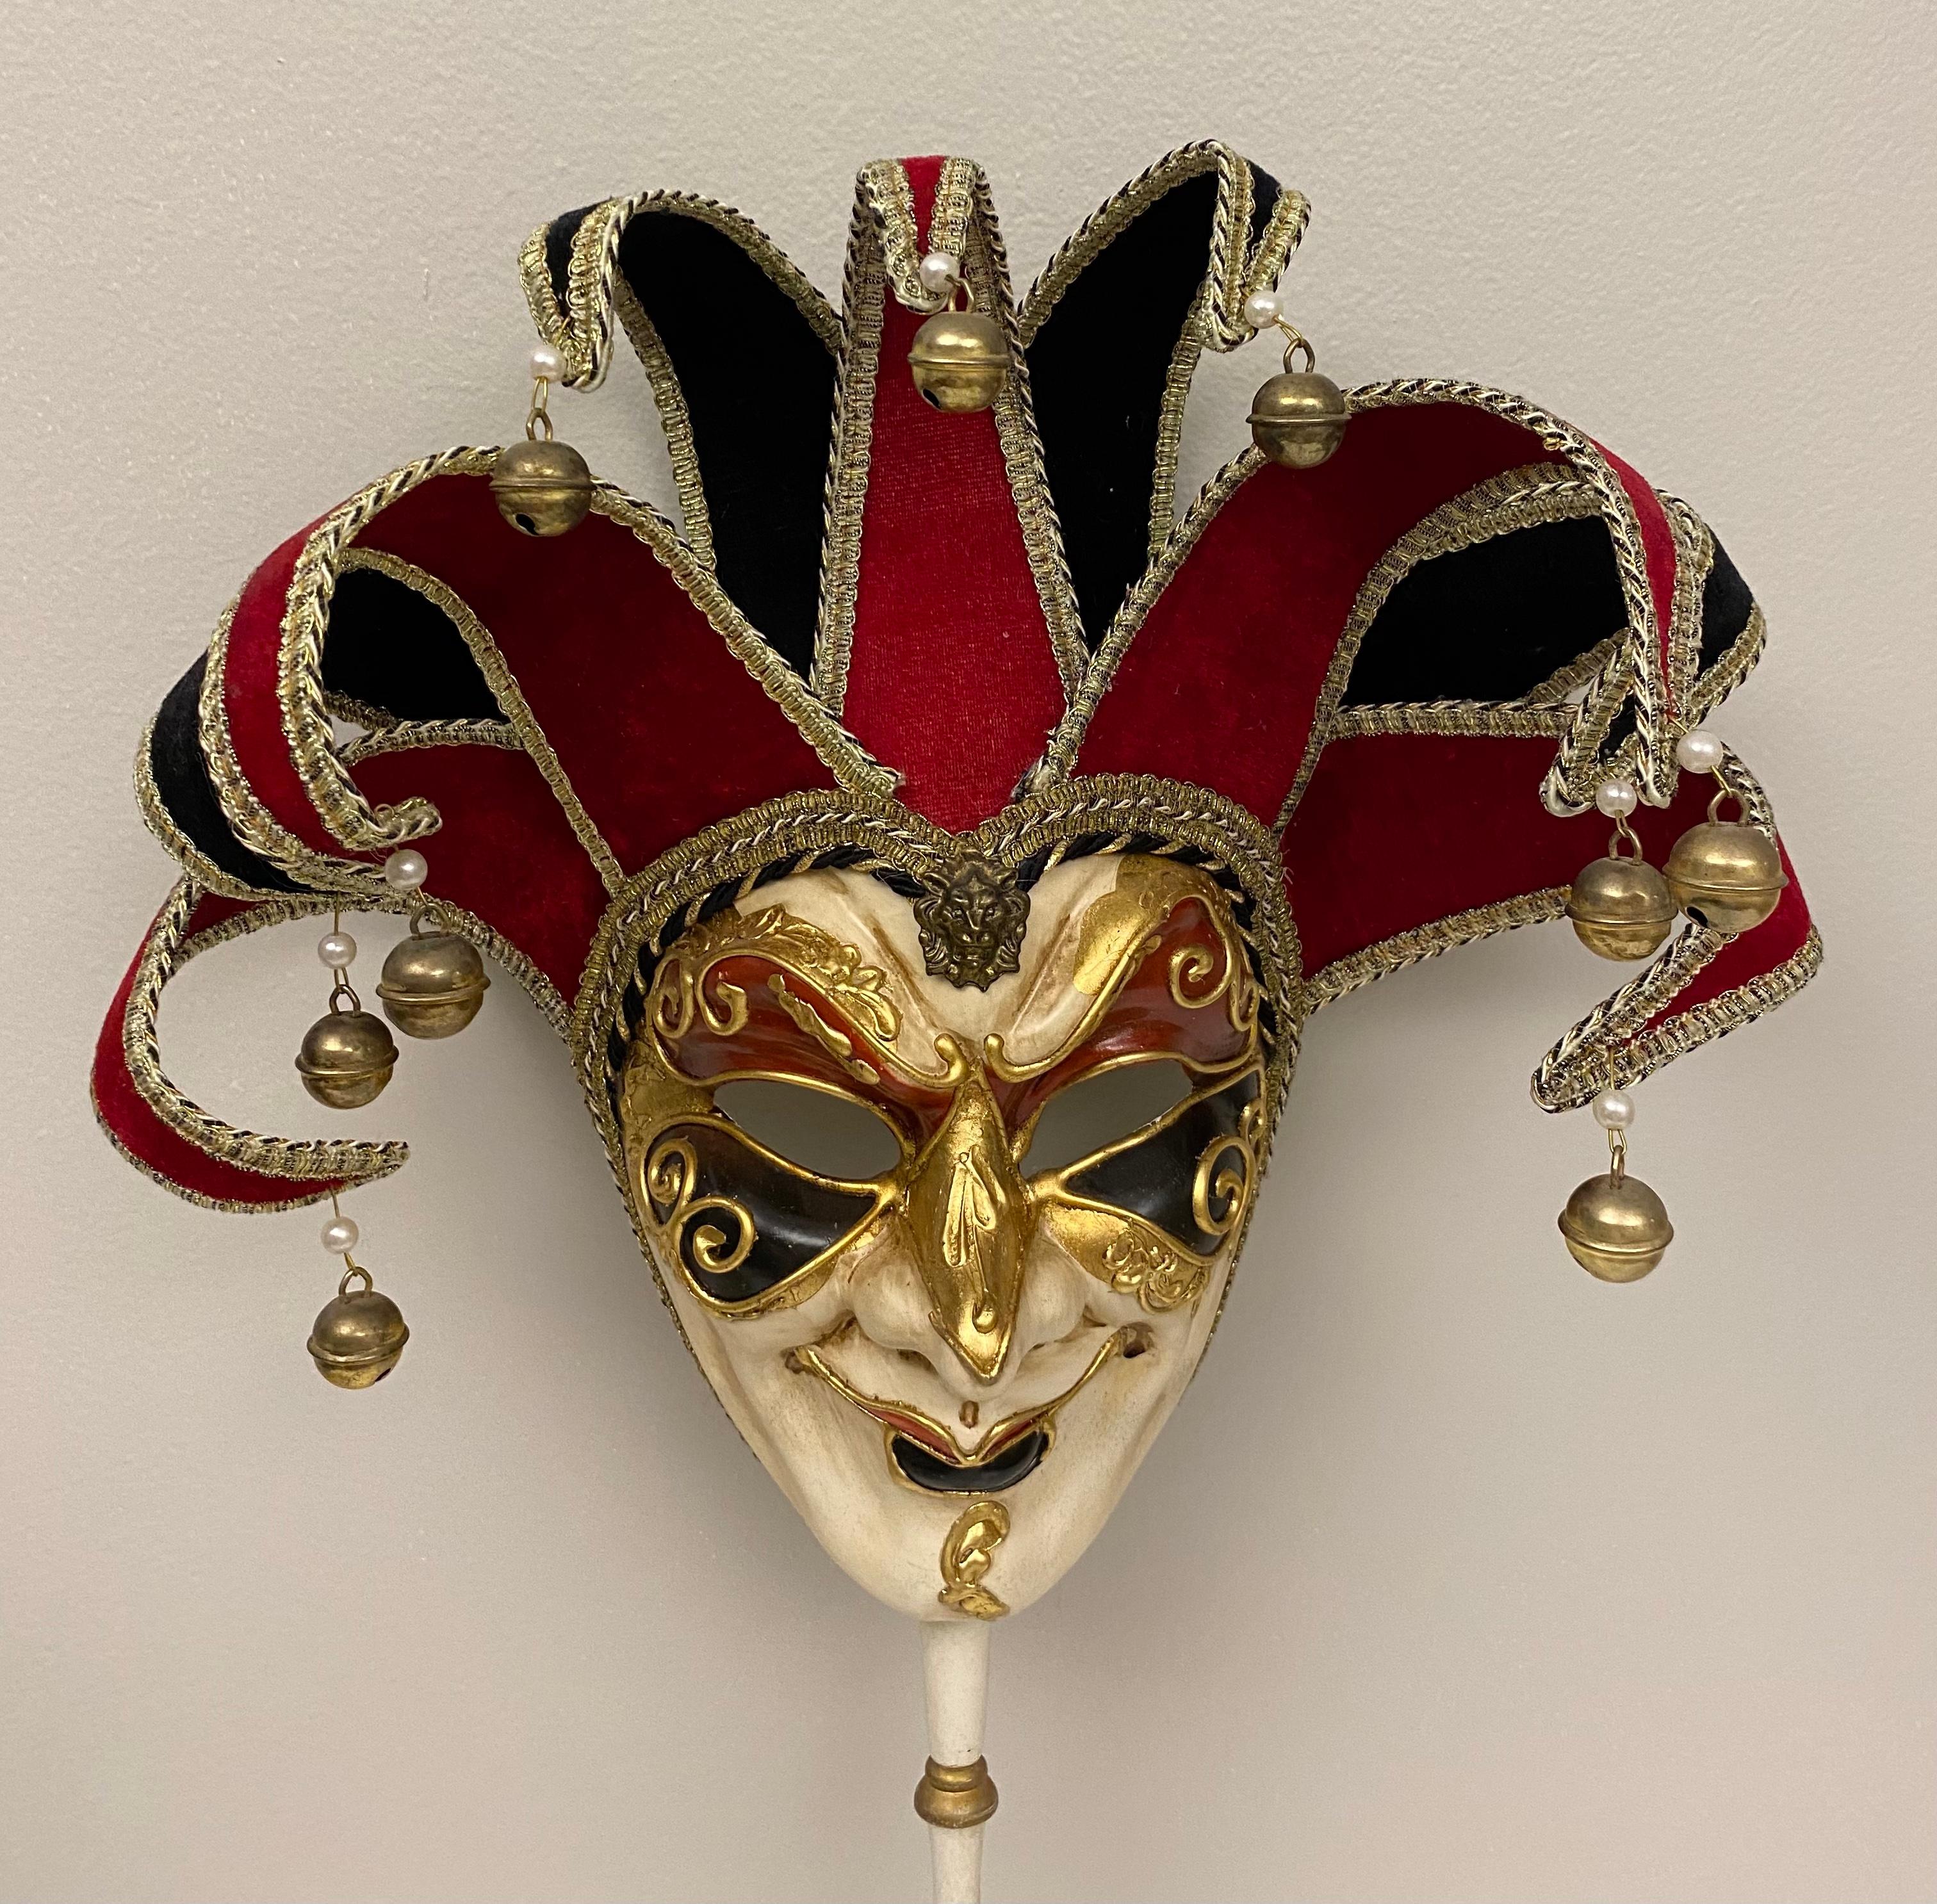 A pair of Folk Art jester masks that are original Venetian creations, entirely hand-drawn and handcrafted, circa 2000. Italian Artists have realized these pieces with respect of craftsmanship traditions and following original designs developed in